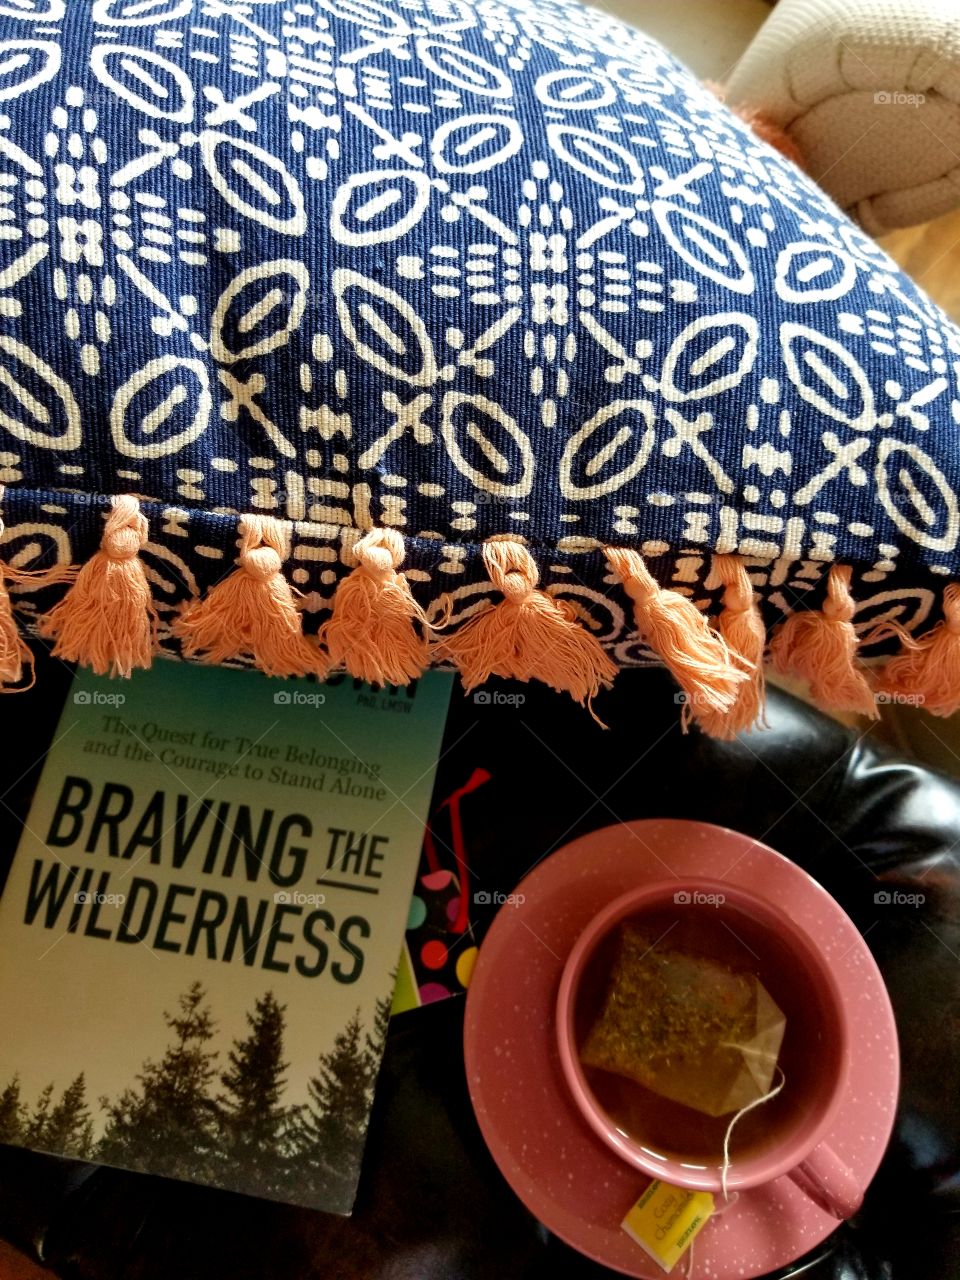 Reading a good book, an inspirational one, makes me happy. I'm happy to catch up on my reading while sipping tea and sitting on my favorite chair. It's a good day.